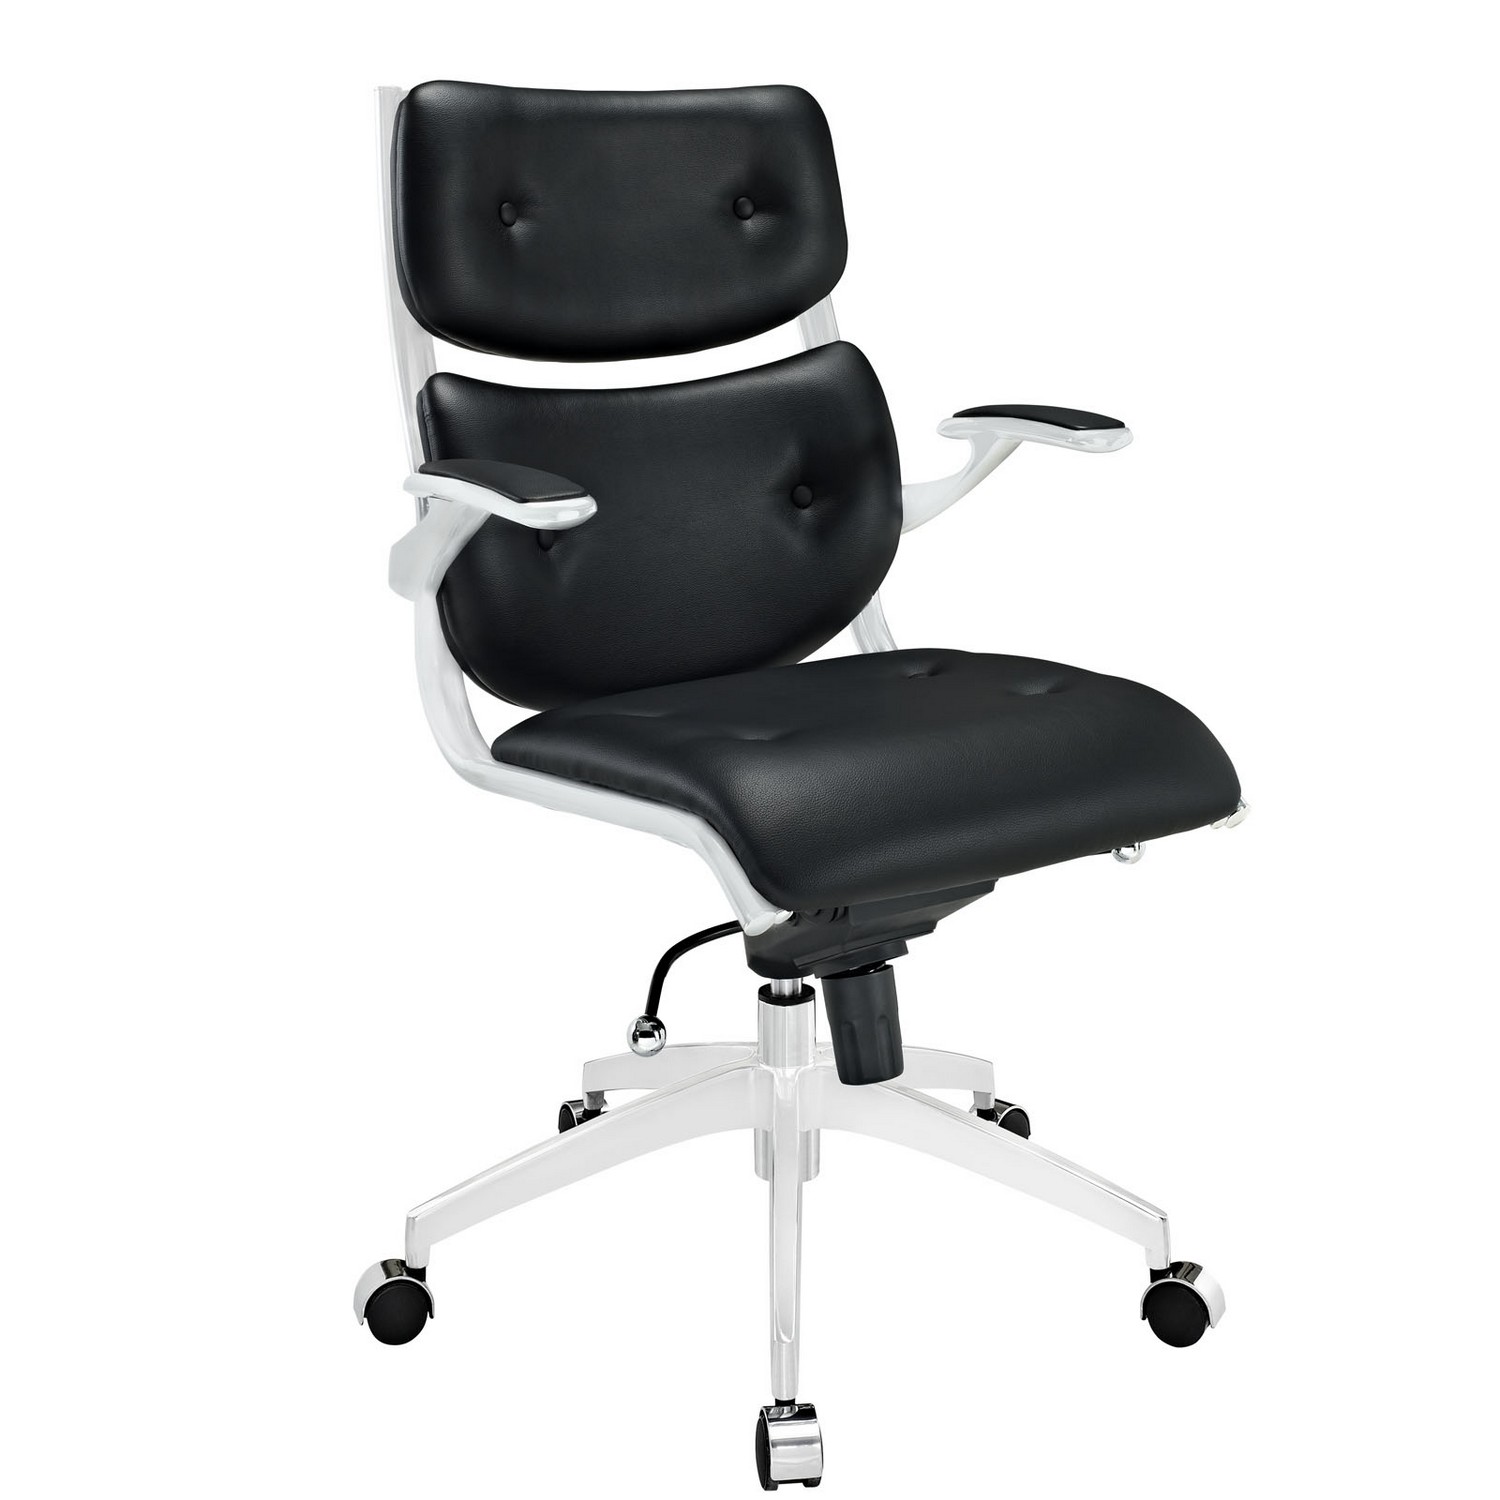 Modway Push Mid Back Office Chair - Black